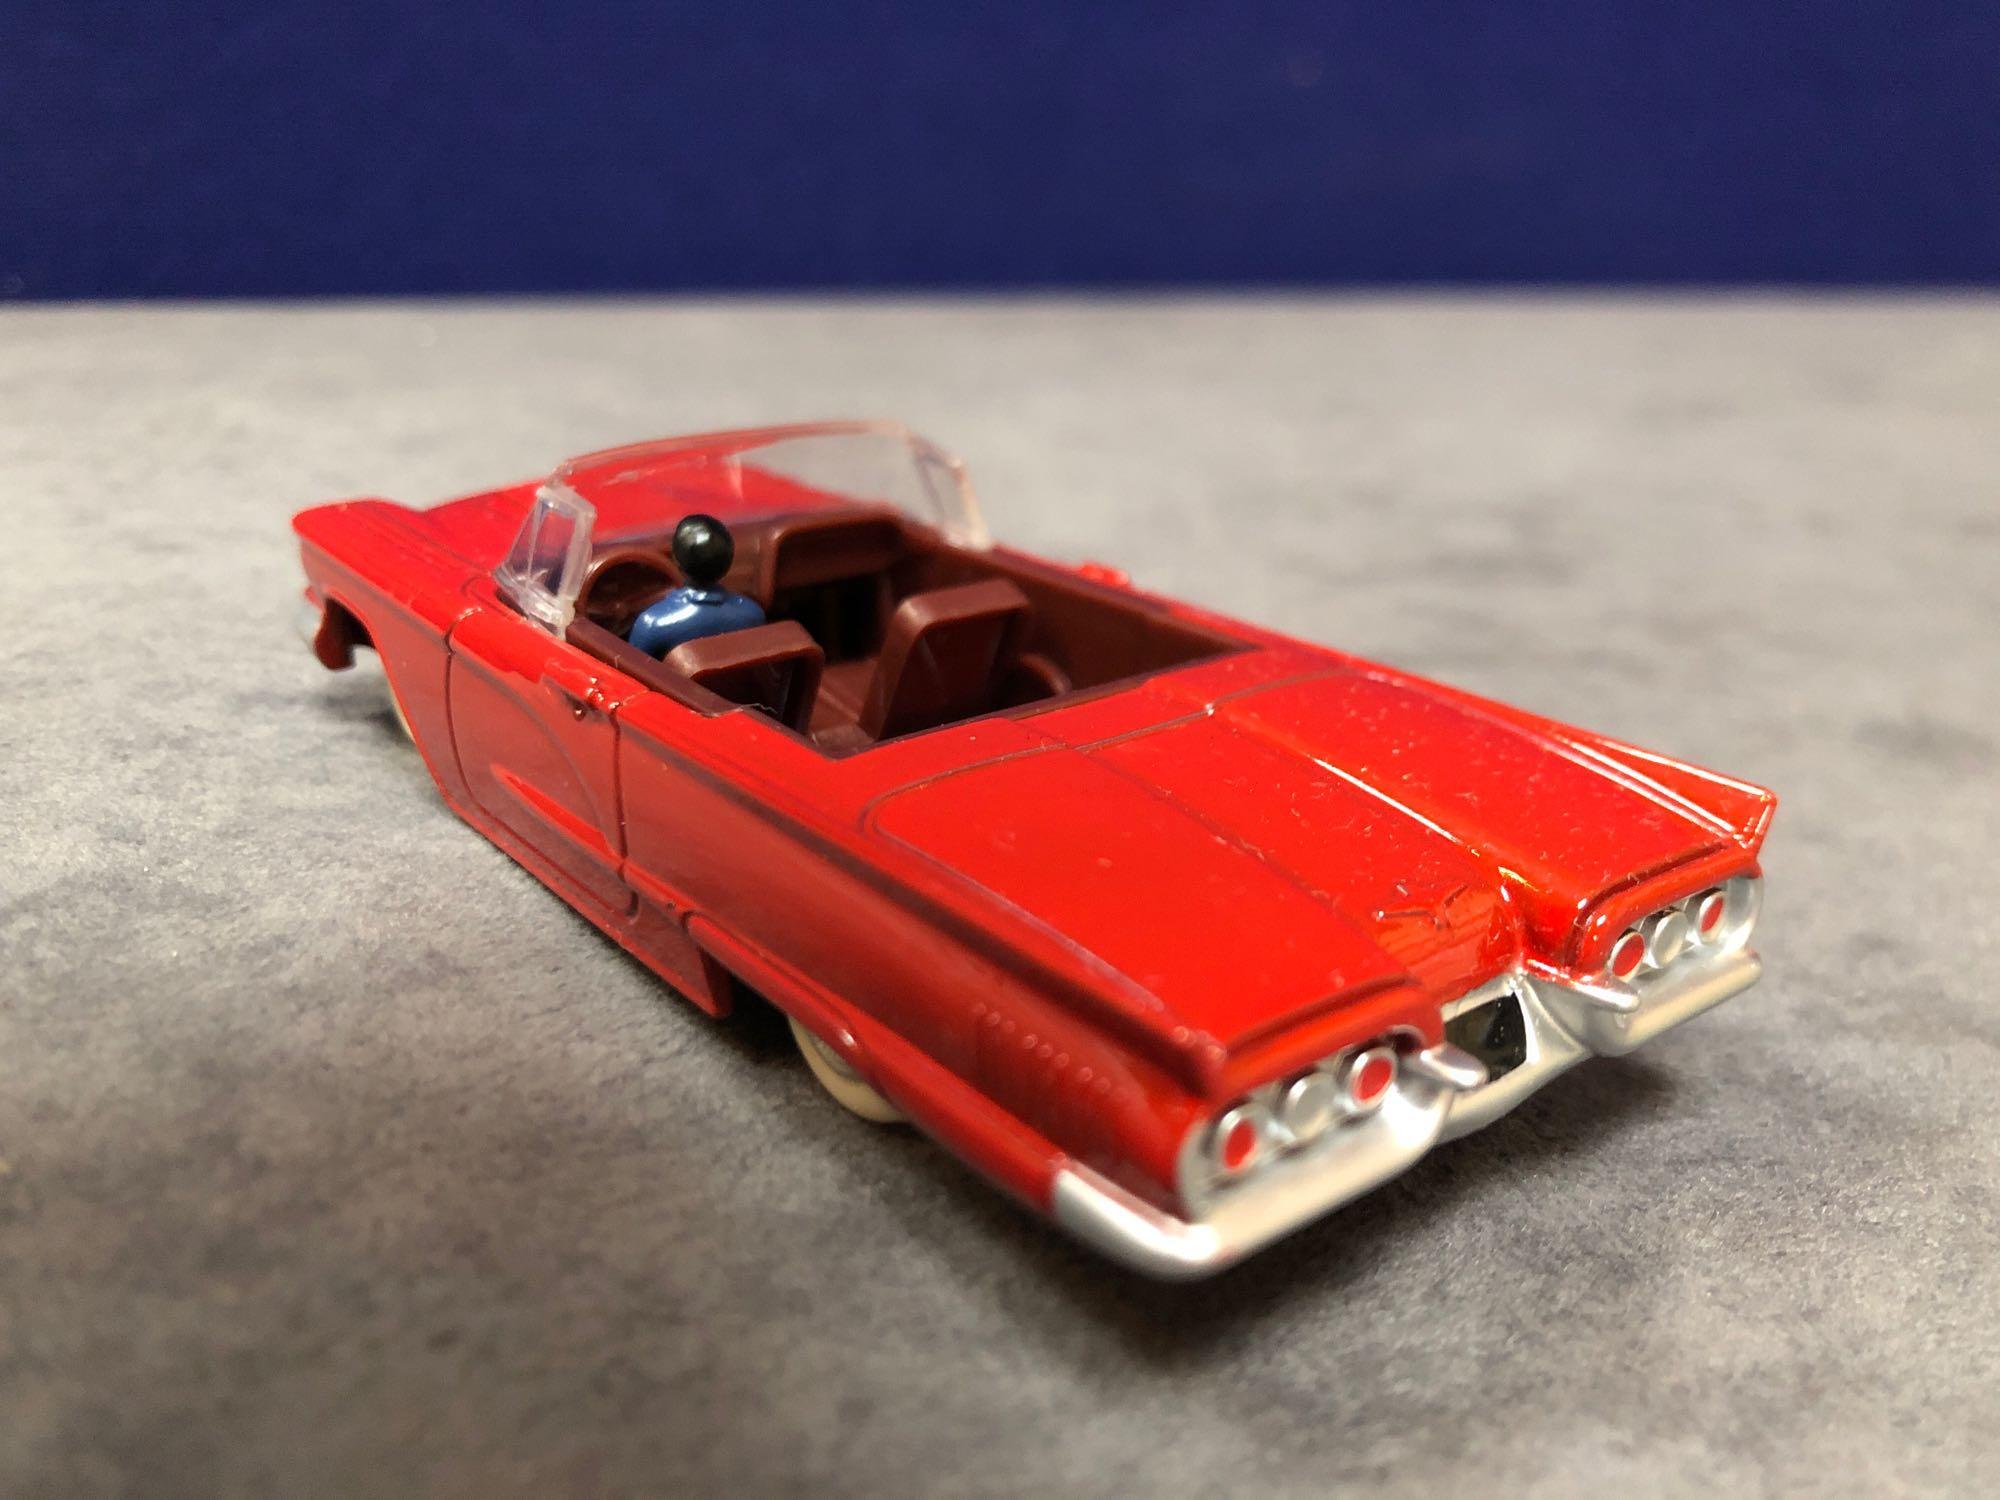 Dinky (Norev Edition)Diecast #555 Ford Thunderbird In Red mint in box - Image 3 of 3